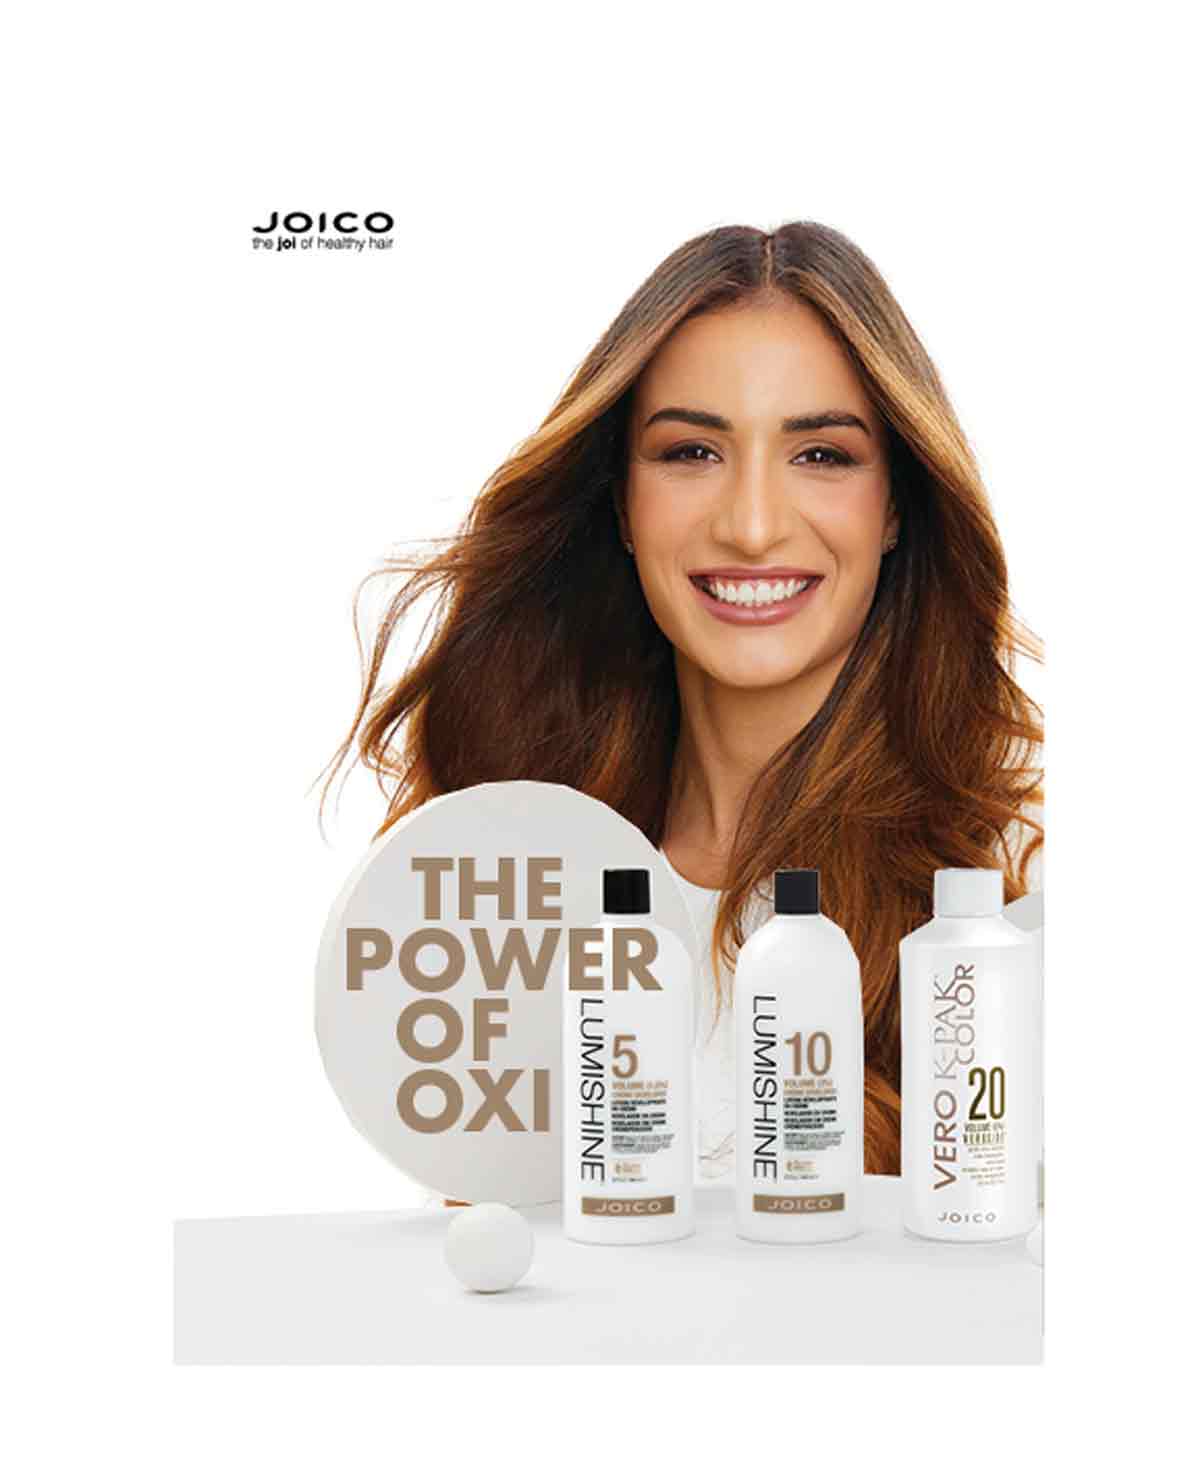 THE POWER OF OXI - MIX & MATCH 35%